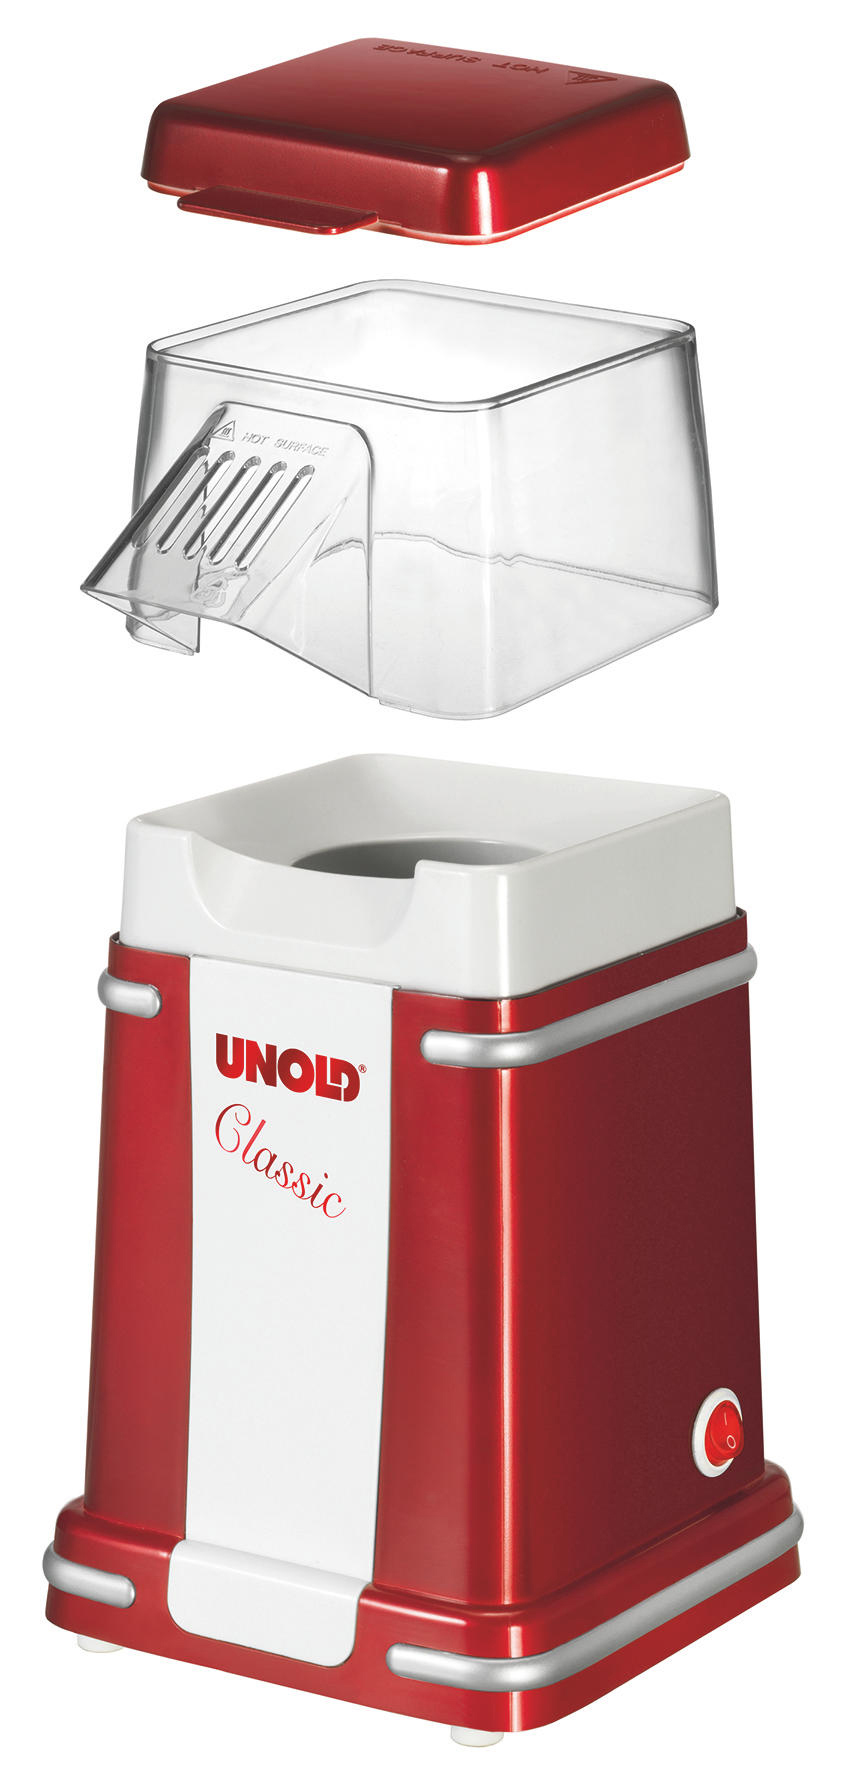 Popcornmaker UNOLD Classic 48525 Rot